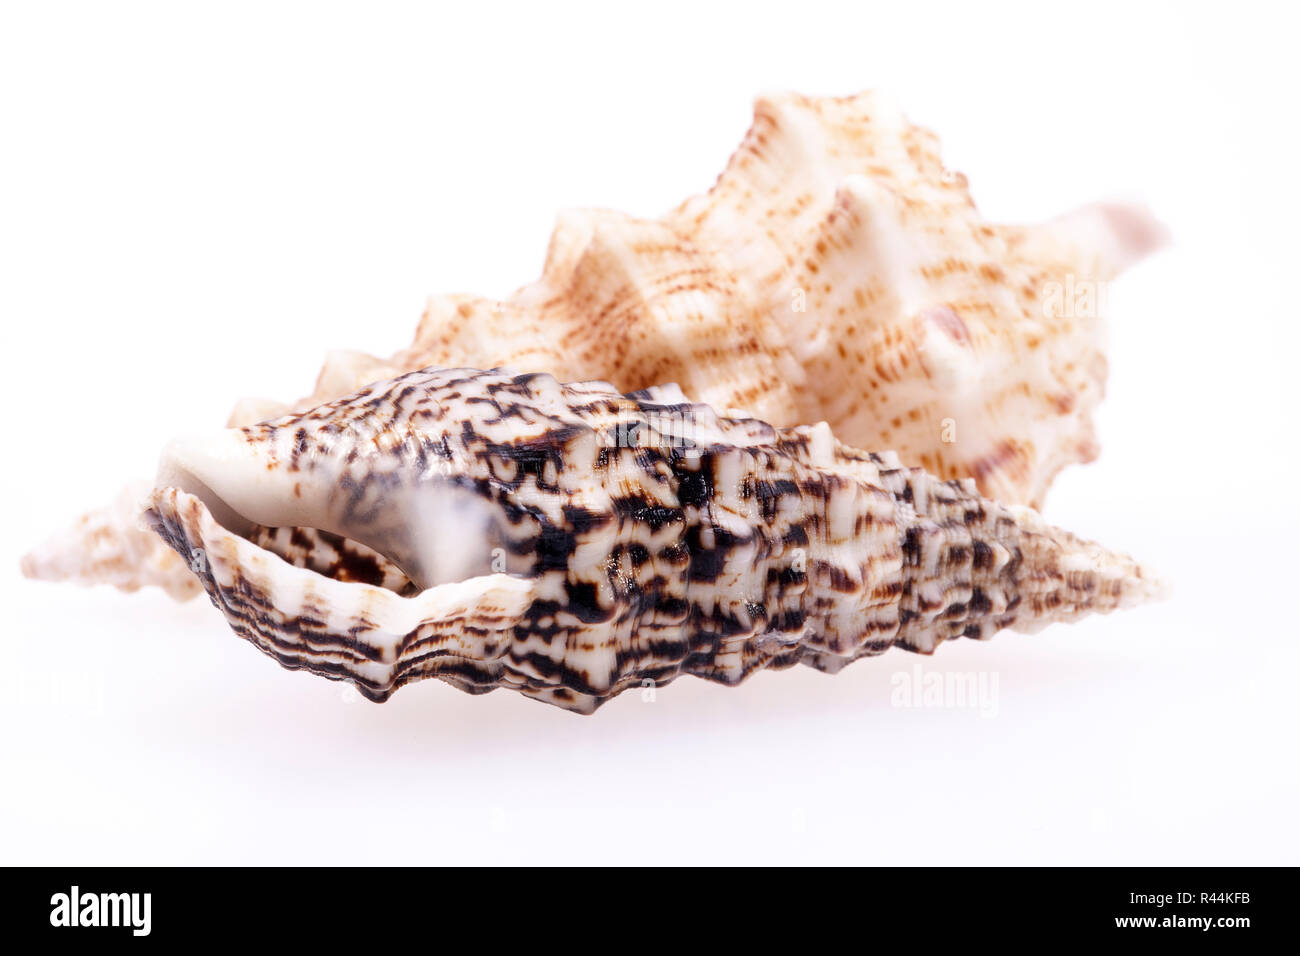 Seashells of  Auger shells called Auger snails isolated on white background Stock Photo